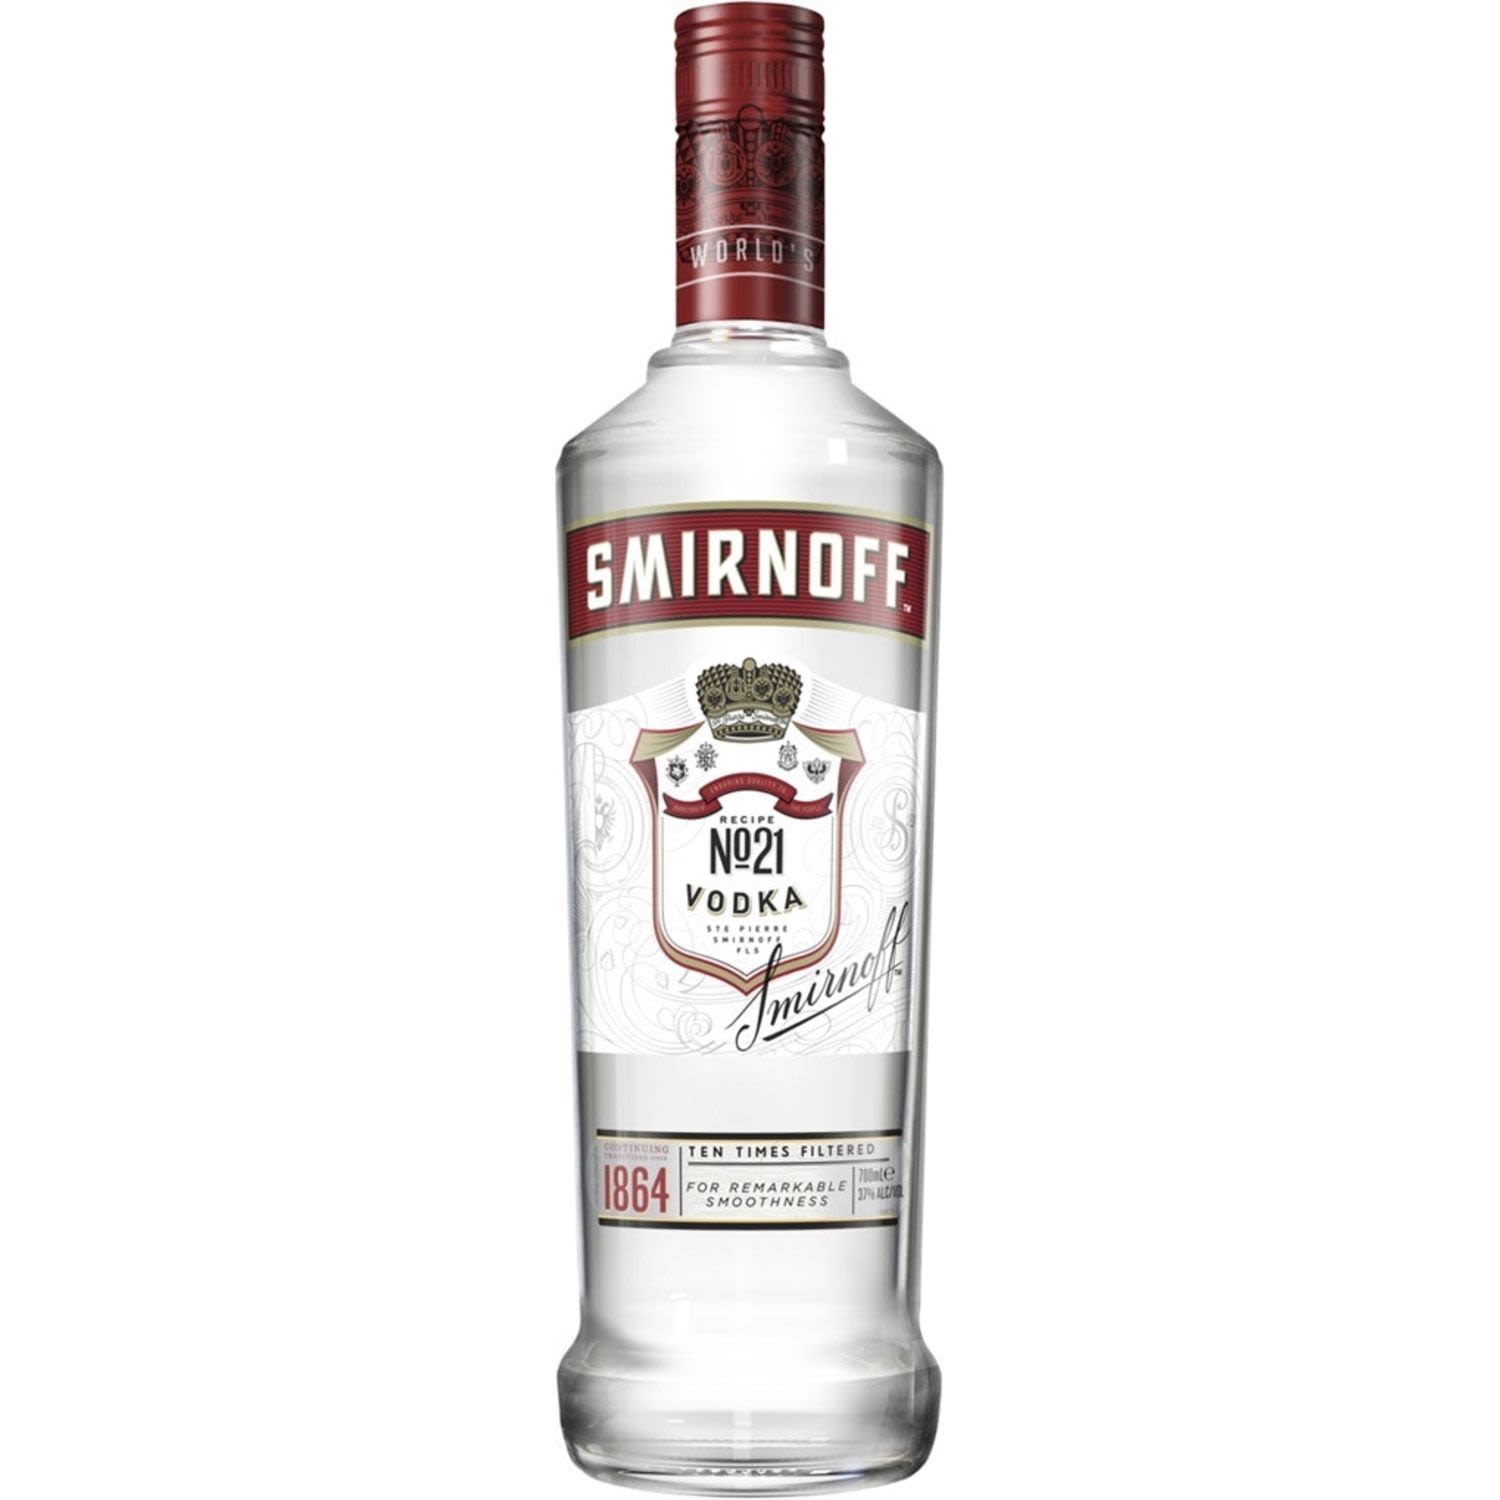 Exceptionally smooth with a clean palate.<br /> <br />Alcohol Volume: 37.00%<br /><br />Pack Format: Bottle<br /><br />Standard Drinks: 20.5</br /><br />Pack Type: Bottle<br /><br />Country of Origin: Australia<br />